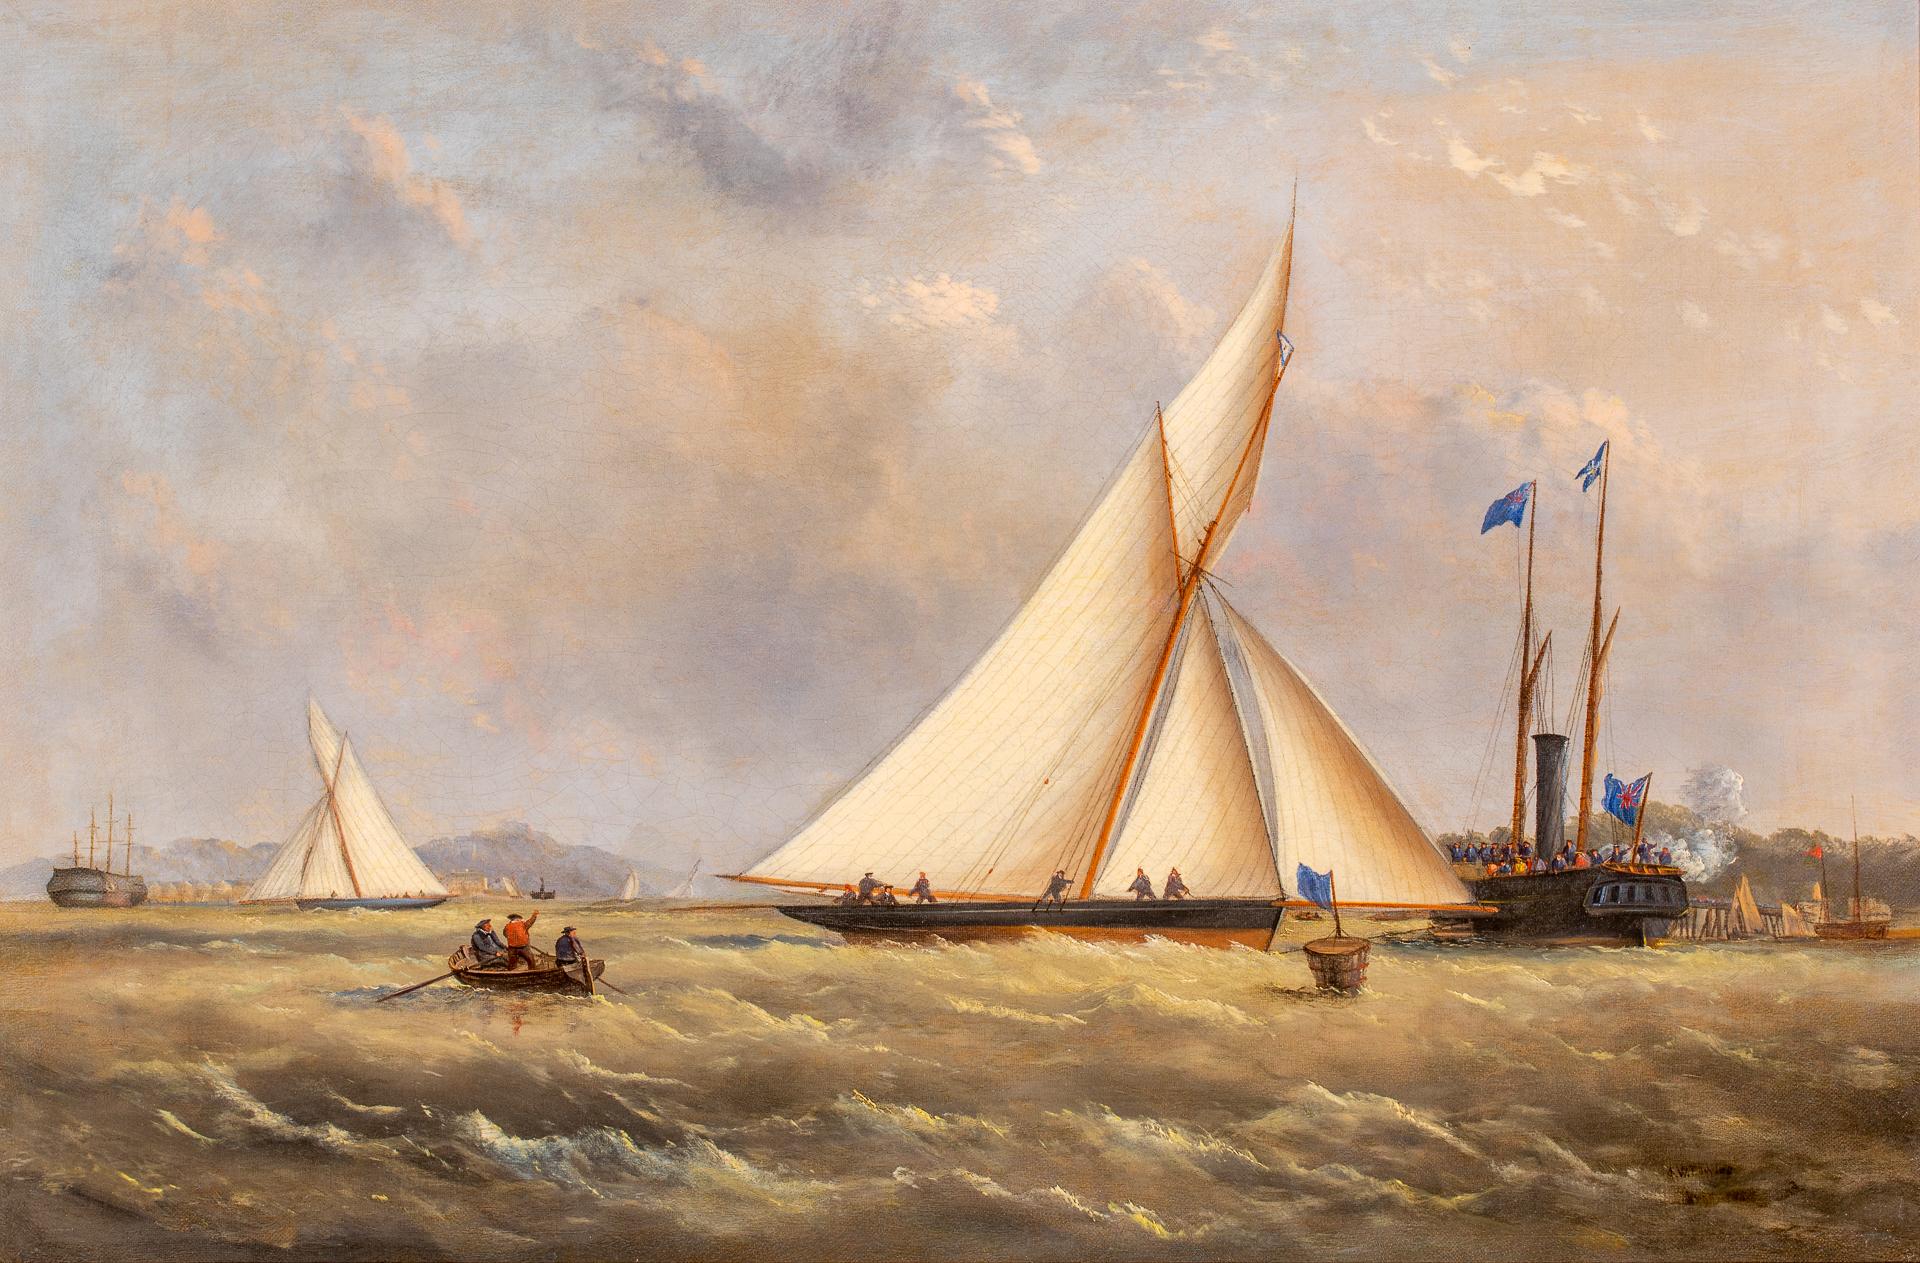 Cutter SPHINX Wins the first Royal Albert Cup at Southsea, 1866 - Painting by Arthur Wellington Fowles